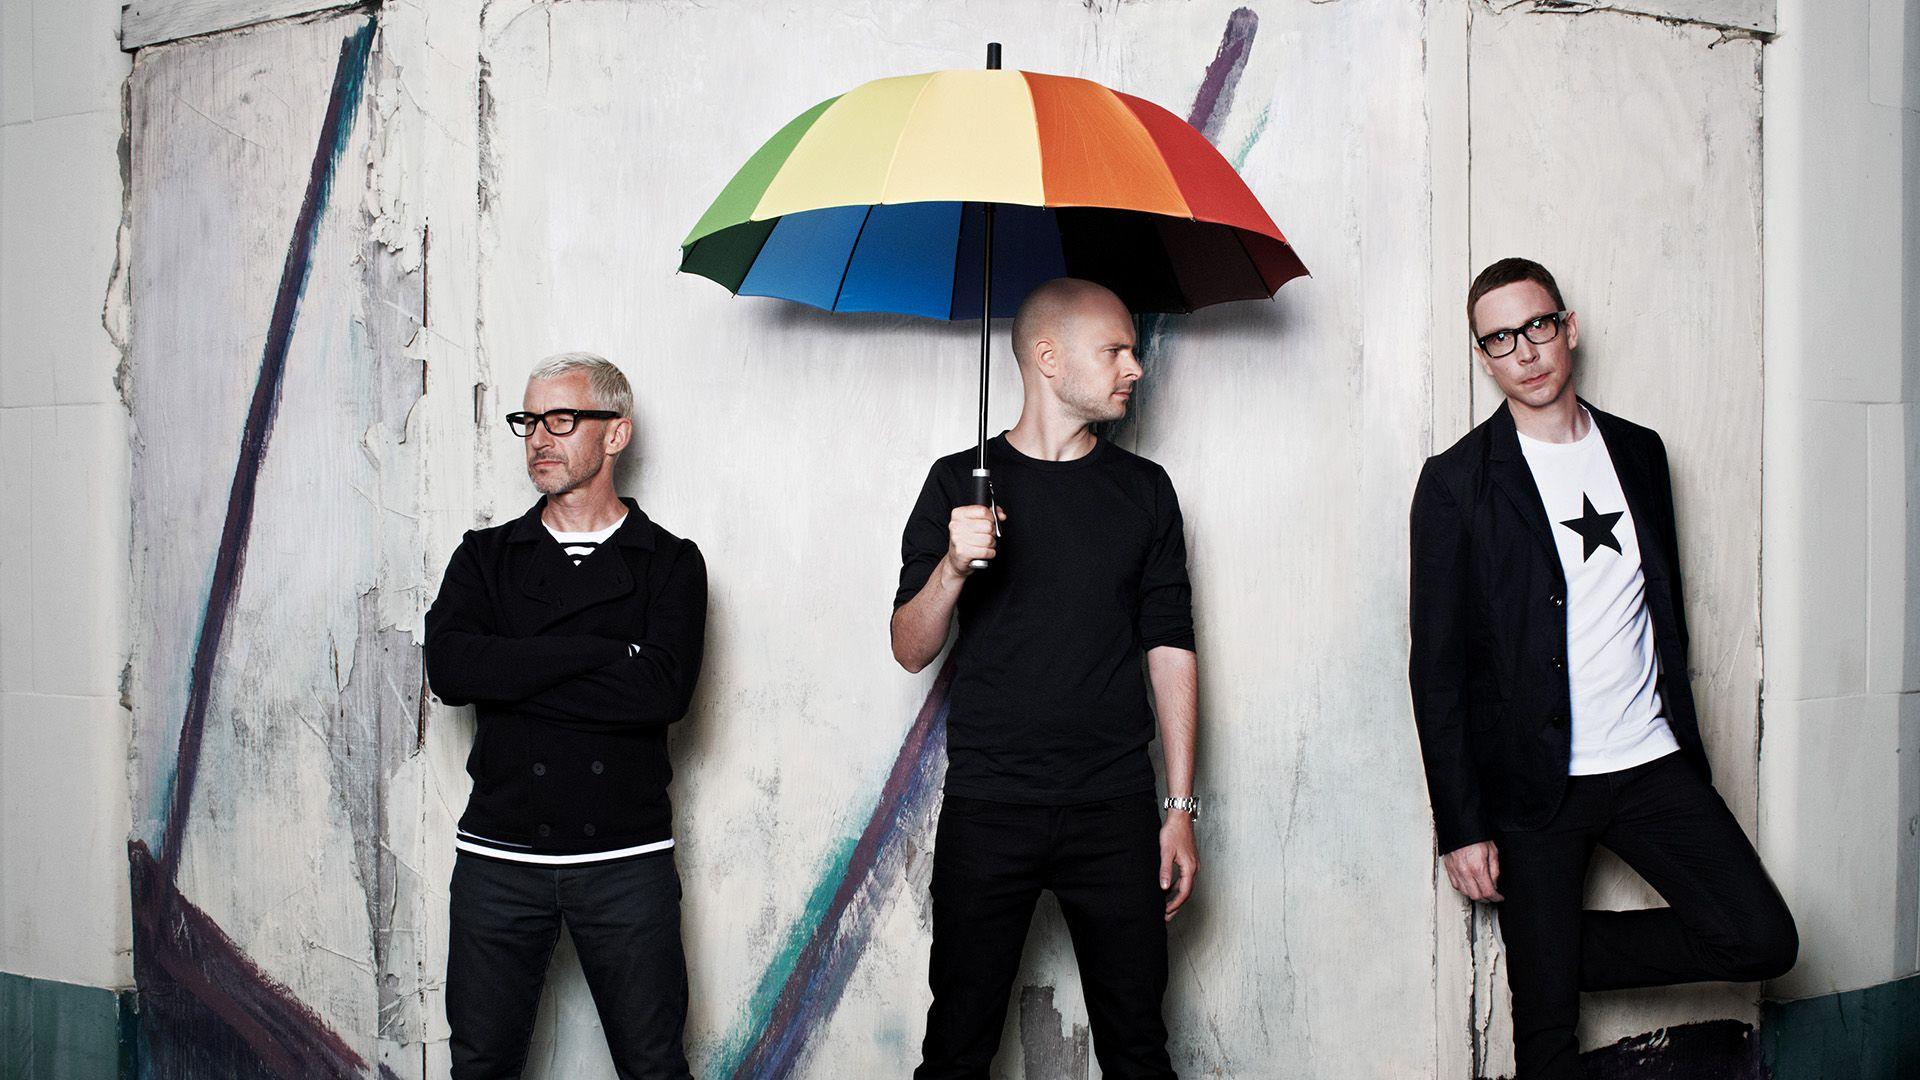 Above & Beyond is an English electronic music group HD Wallpaper